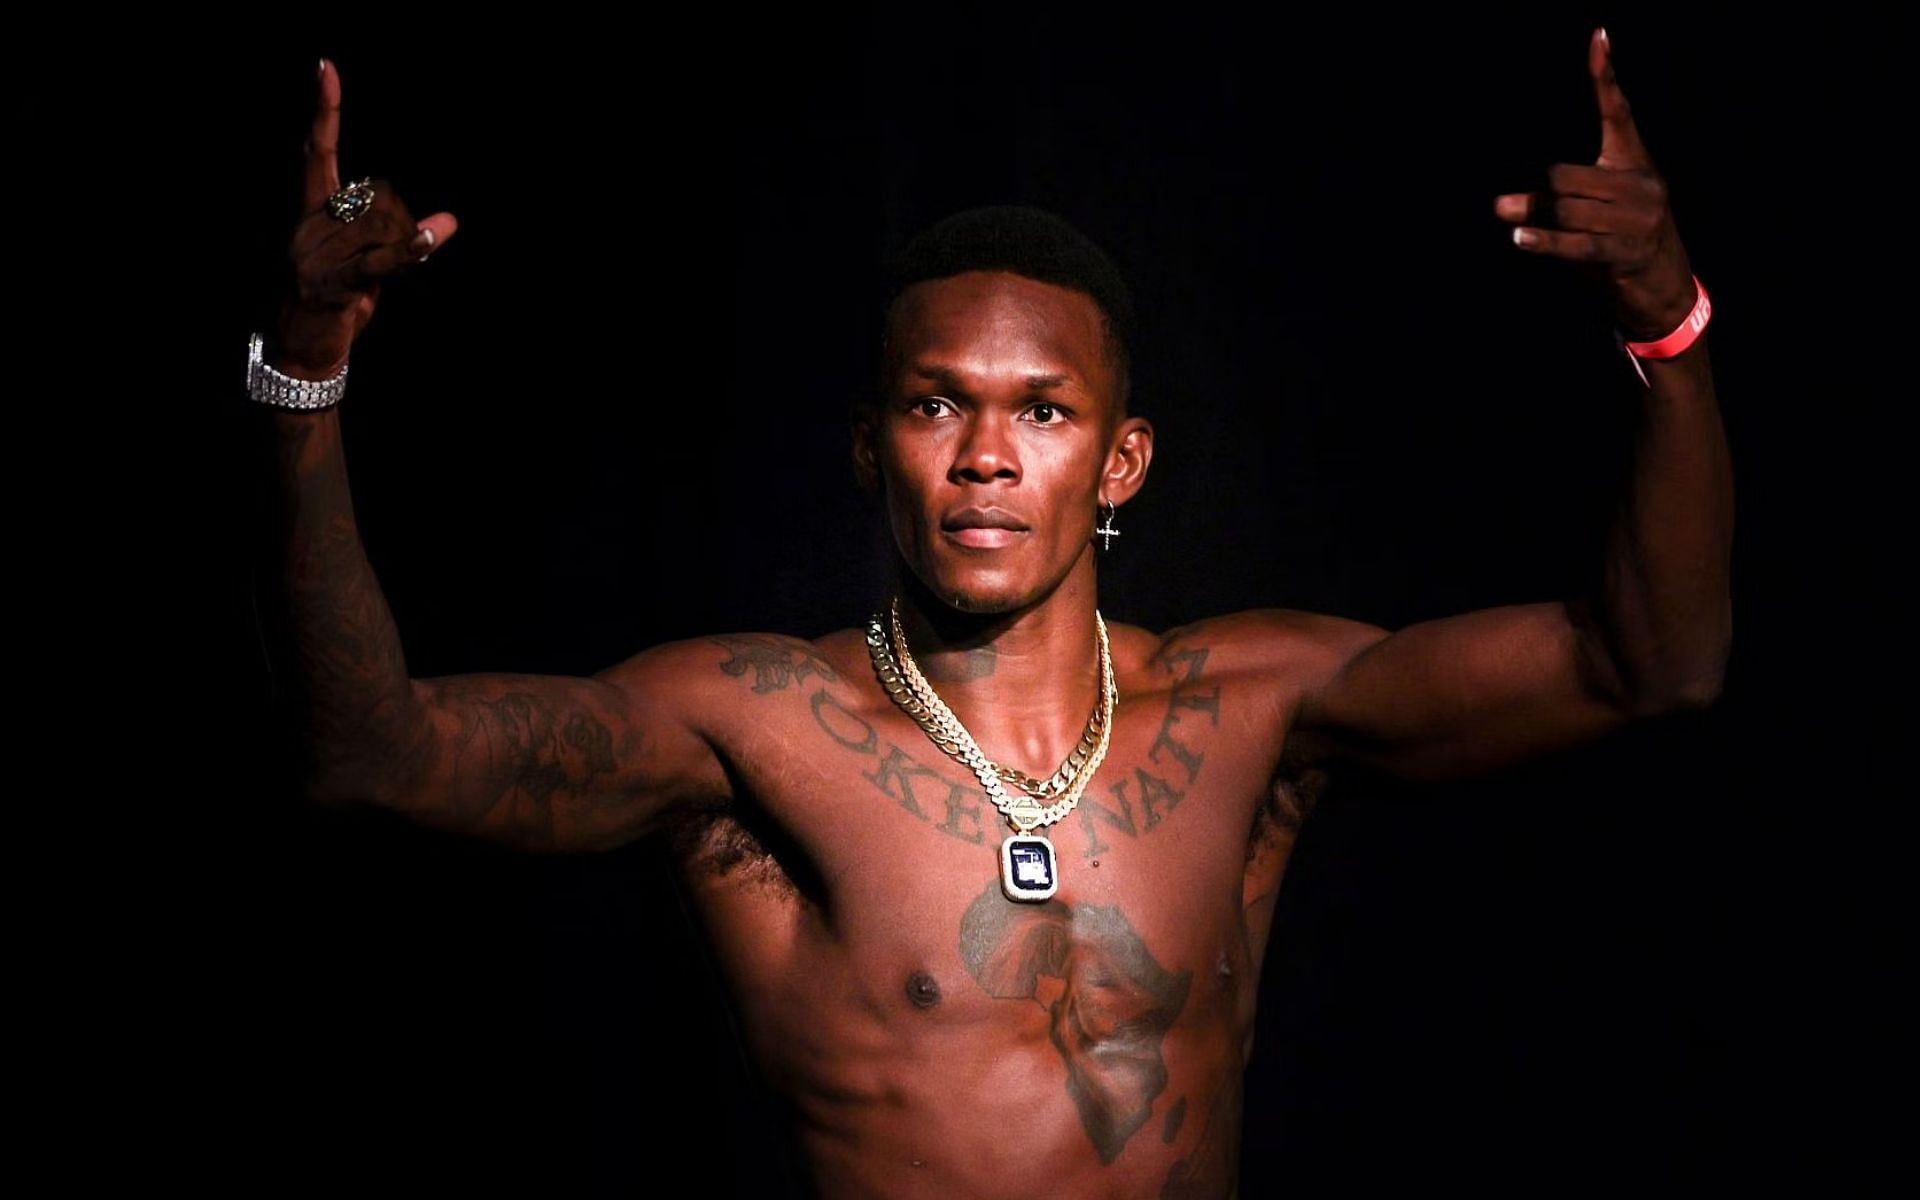 Israel Adesanya flaunts new neck tattoo, asks fans to decode its meaning